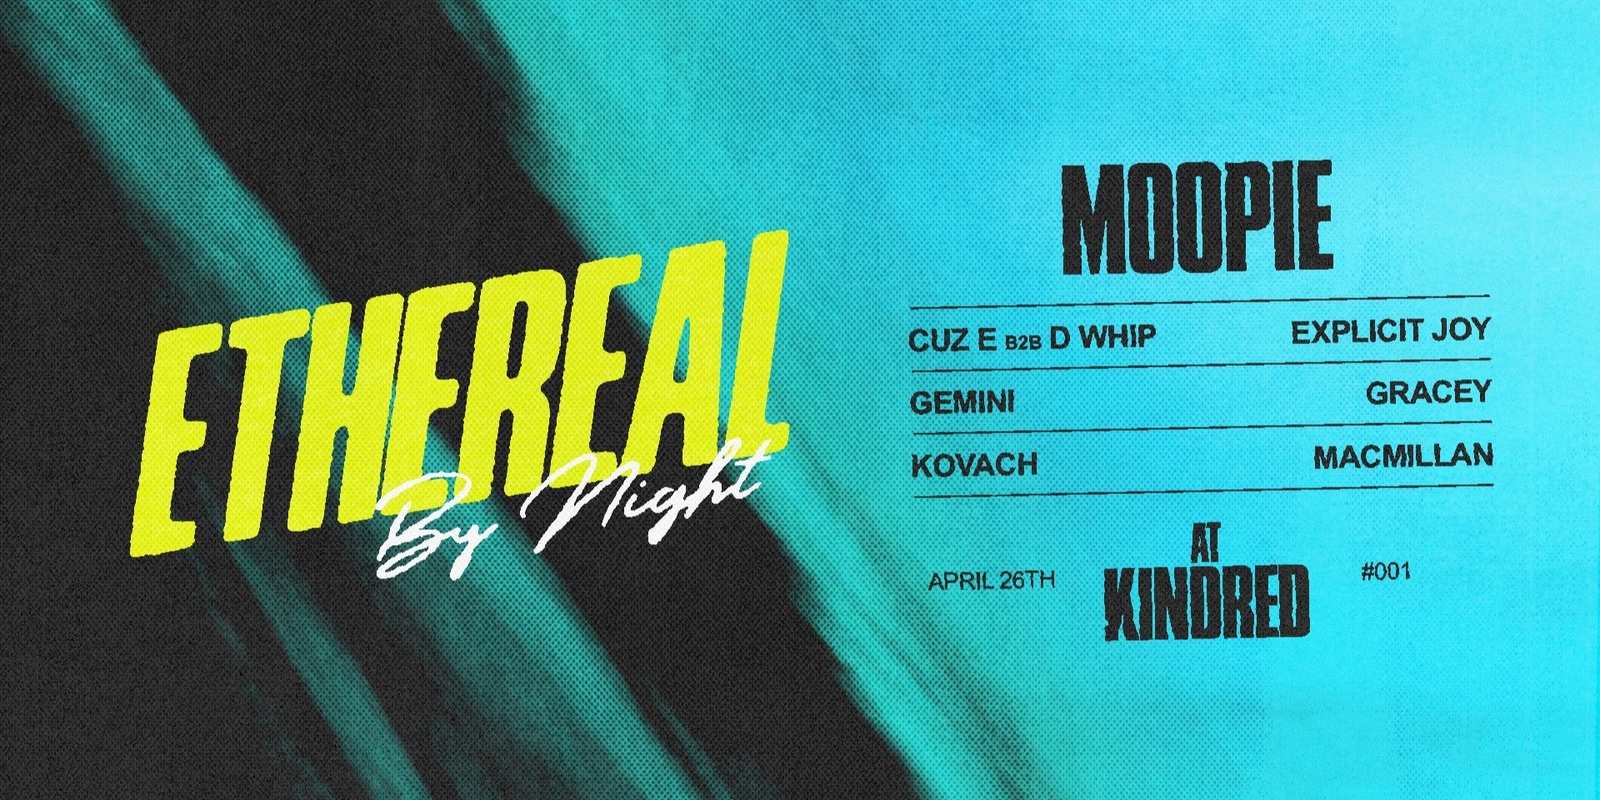 Banner image for Ethereal By Night: Presents Moopie